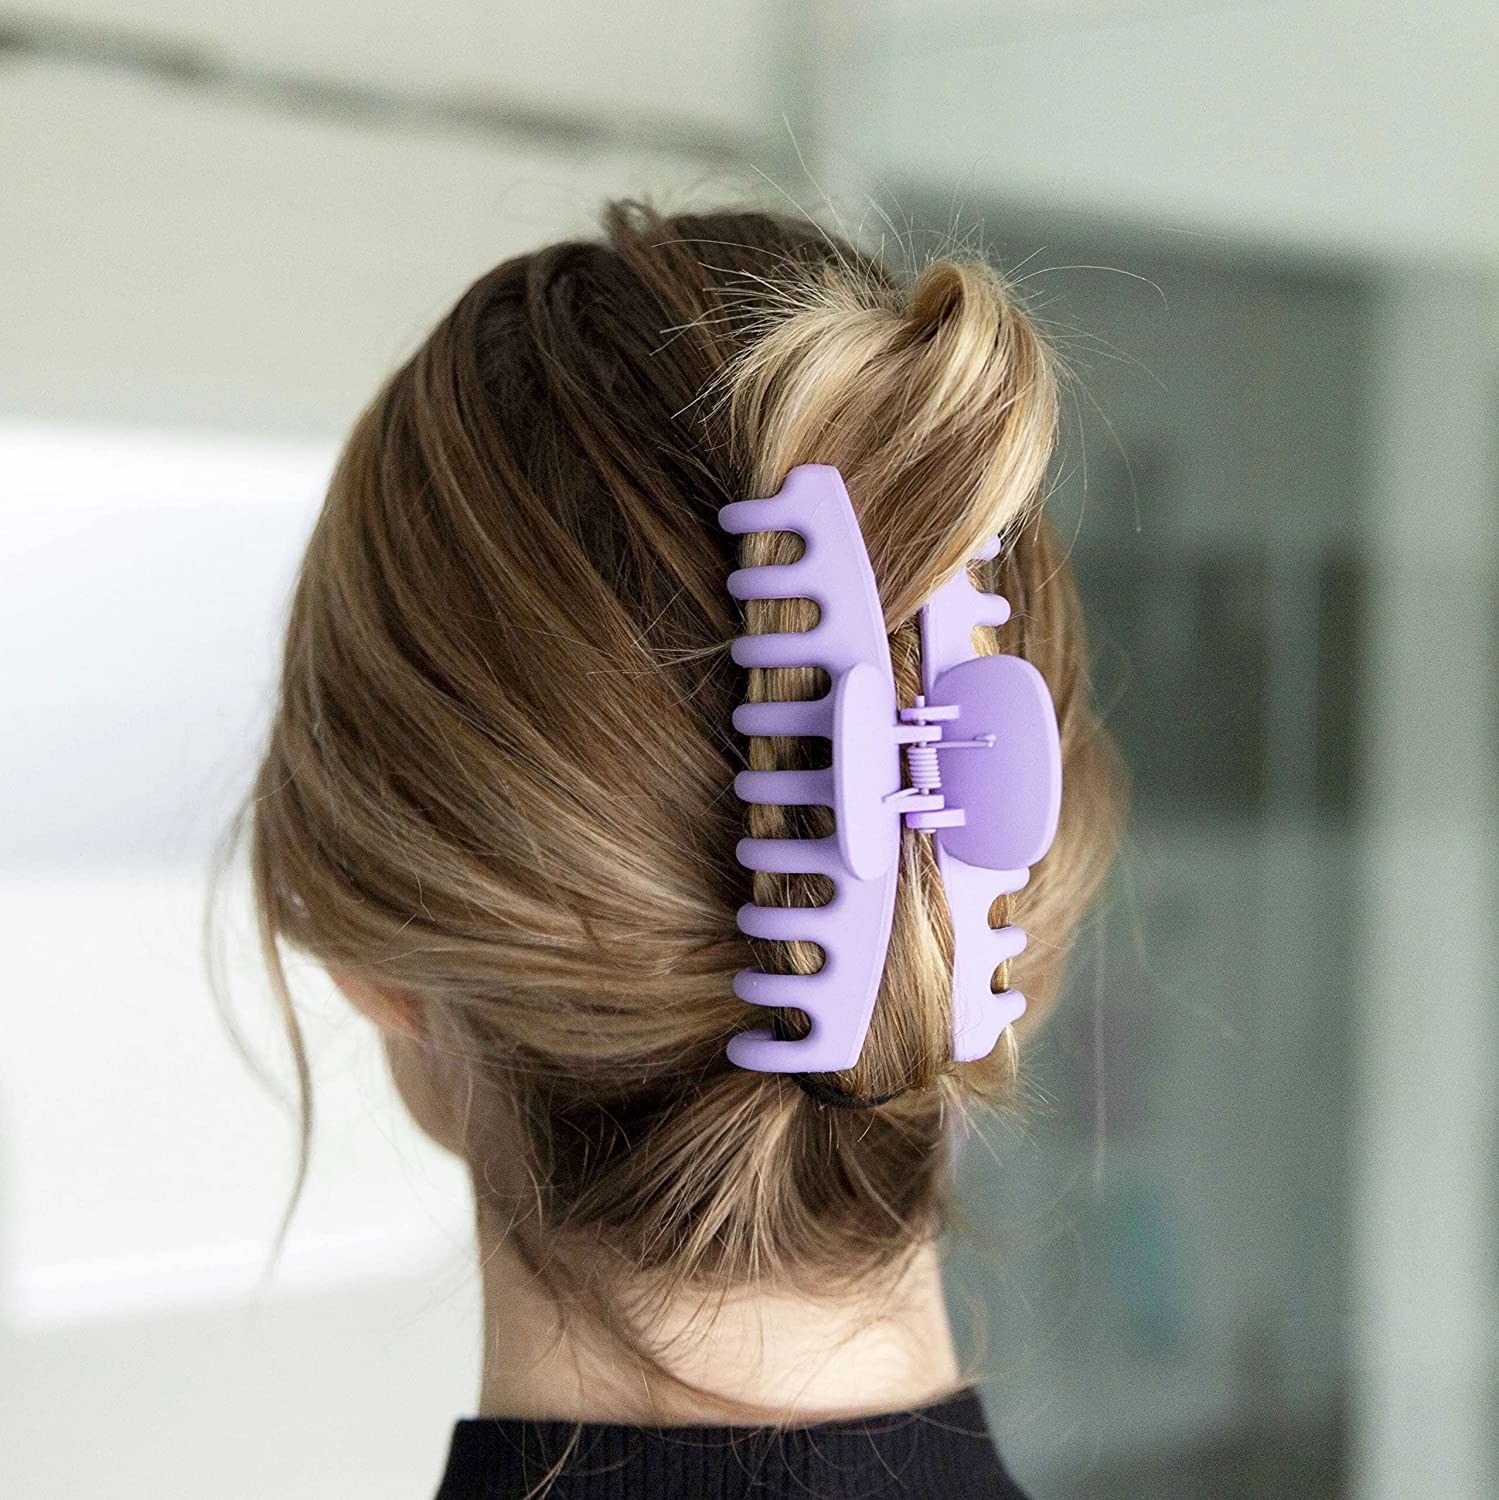 A person with the clip in their hair